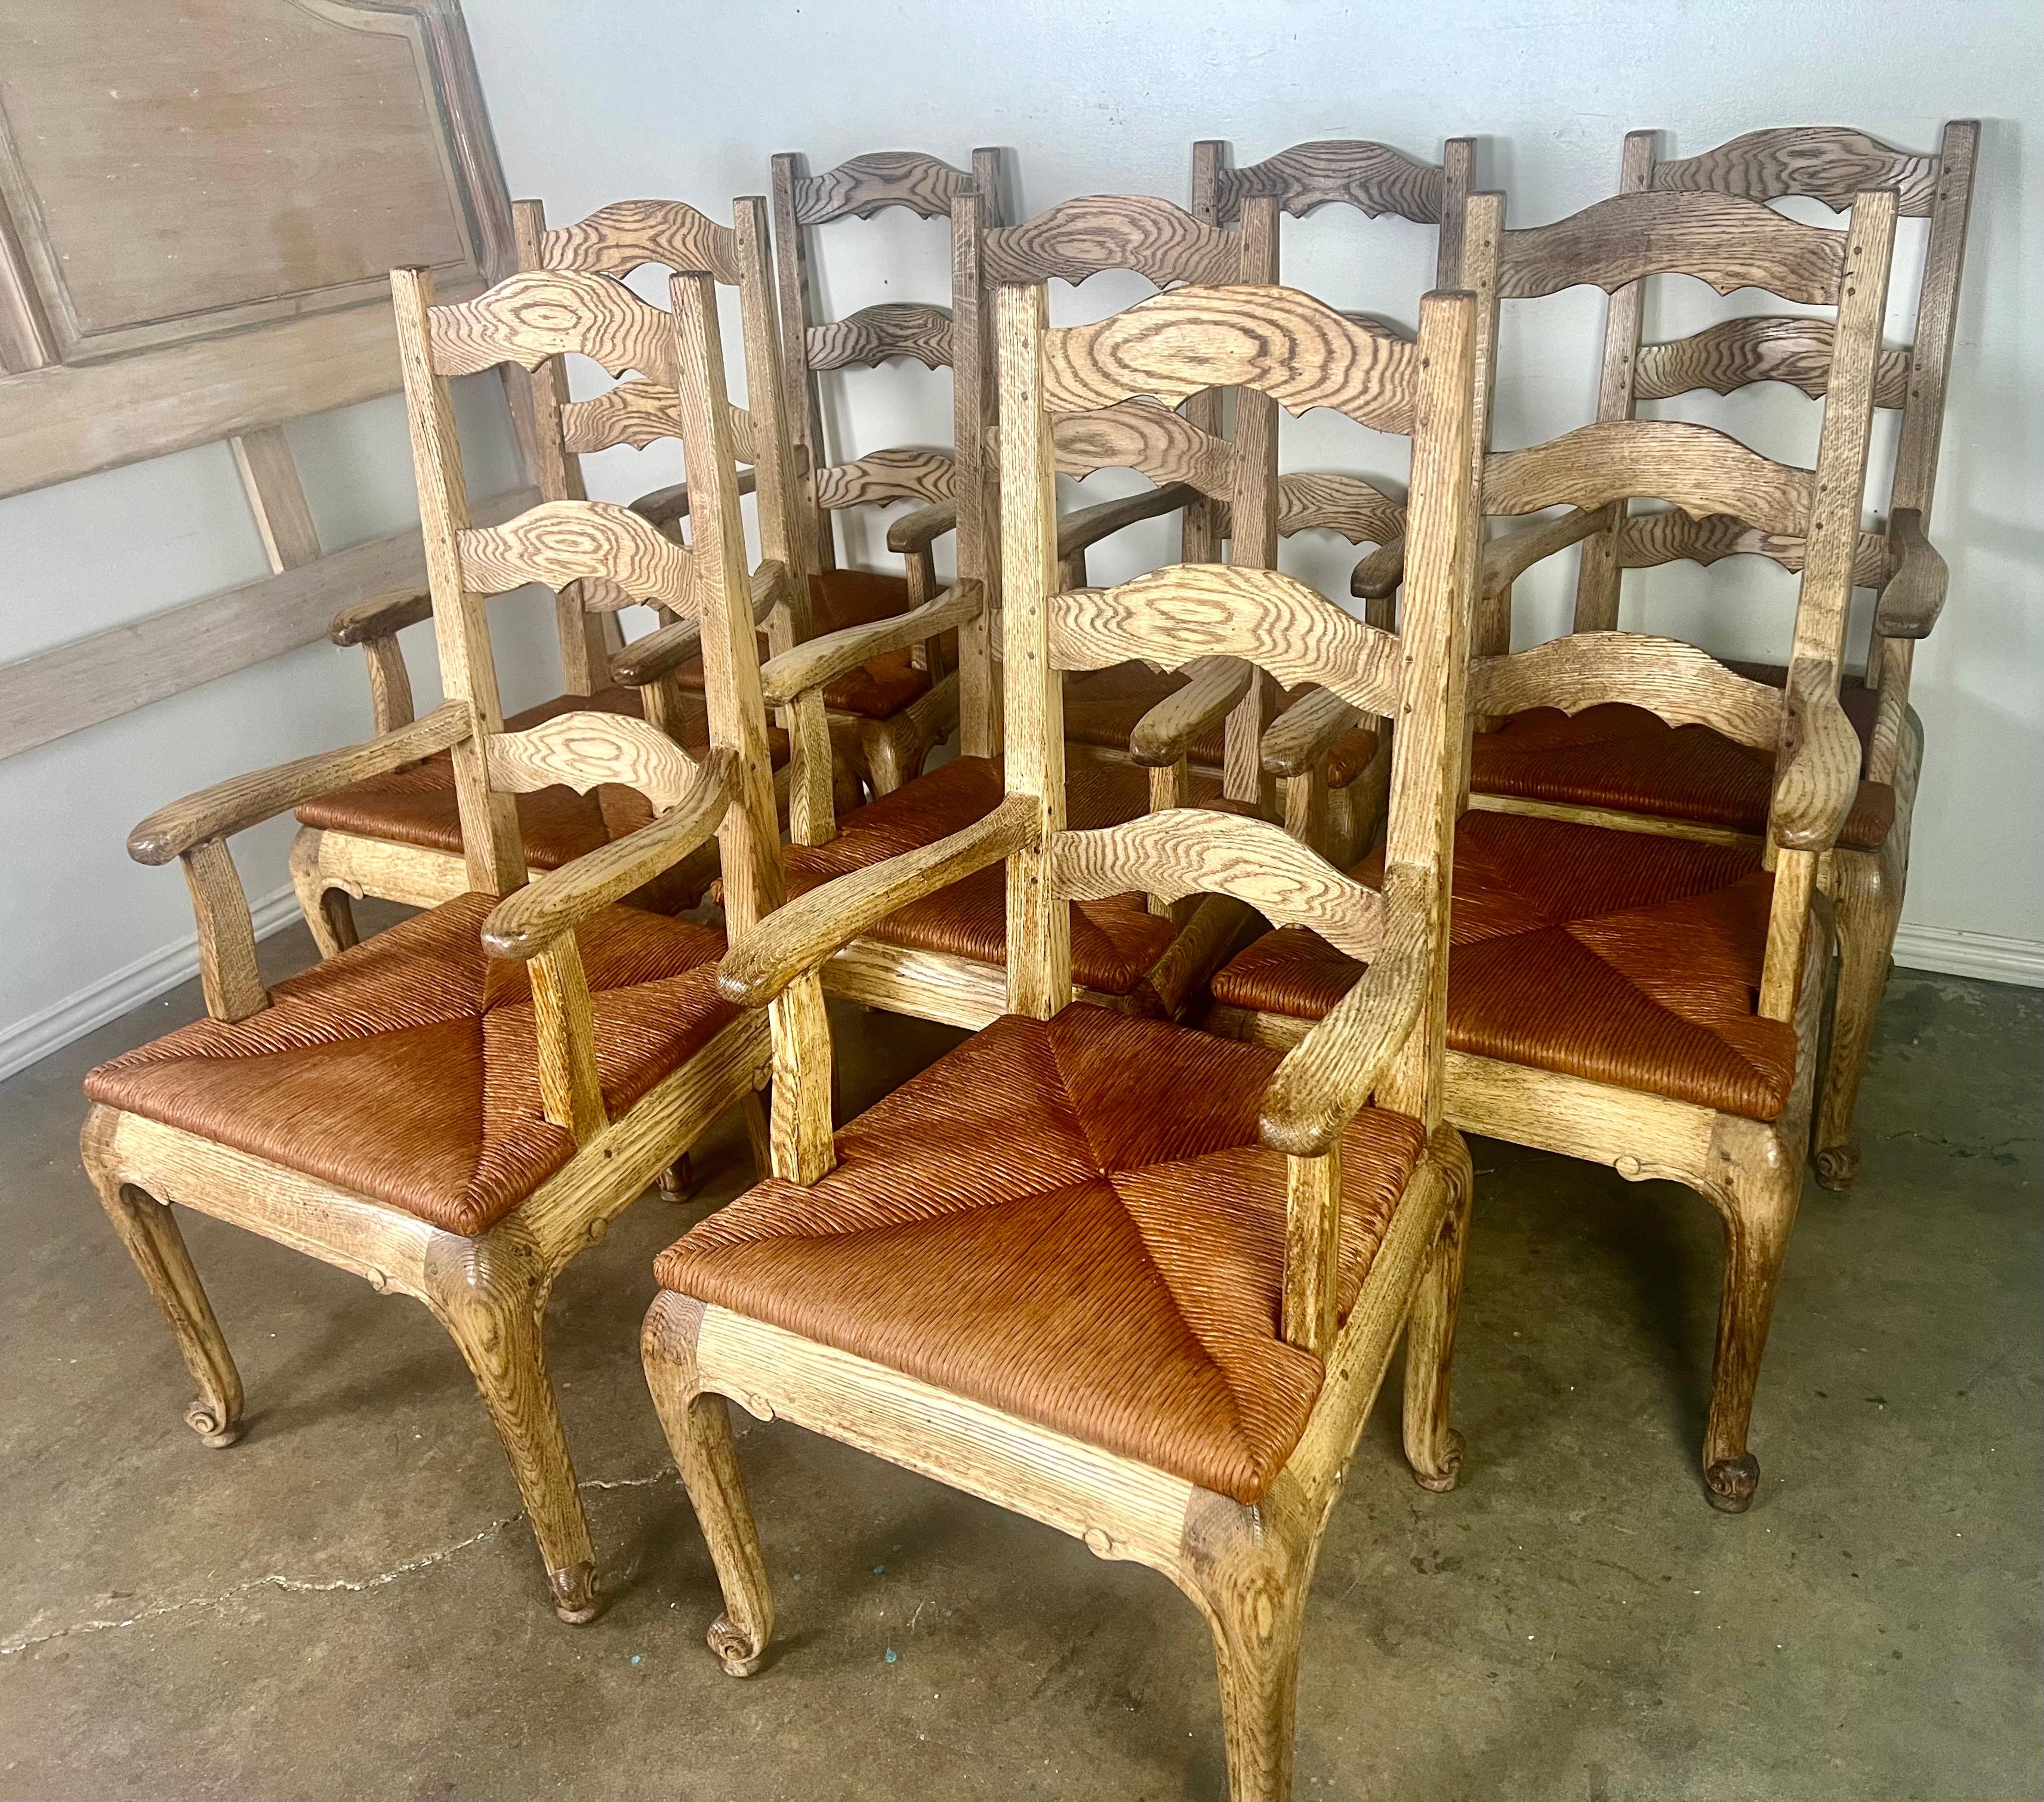 Set of eight French Provincial Ladderback armchairs with rush seats, crafted by Le Monde du Bois, a French furniture manufacturer in the early 1900's.  These chairs beautifully capture the rustic elegance and refined craftsmanship of early 20th